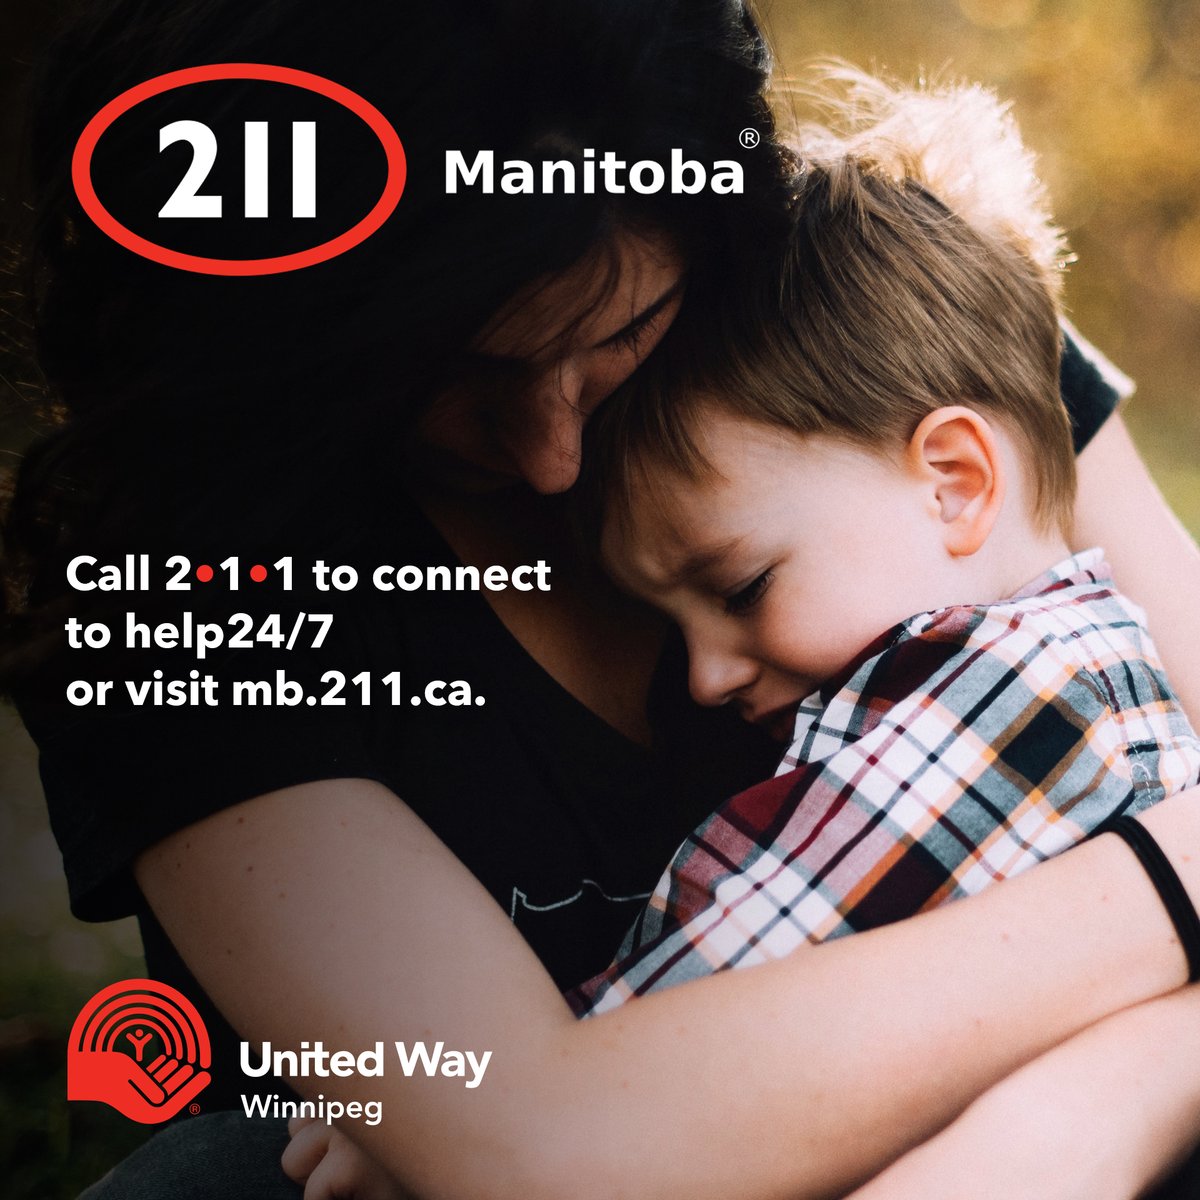 Tomorrow is #211Day — a day to remind all Manitobans that the 211 helpline is a front door to support.

Did you know 211 is free, available 24/7 & in 150+ languages? Tell a friend & learn more at mb.211.ca!

#211Manitoba #HelpStartsHere